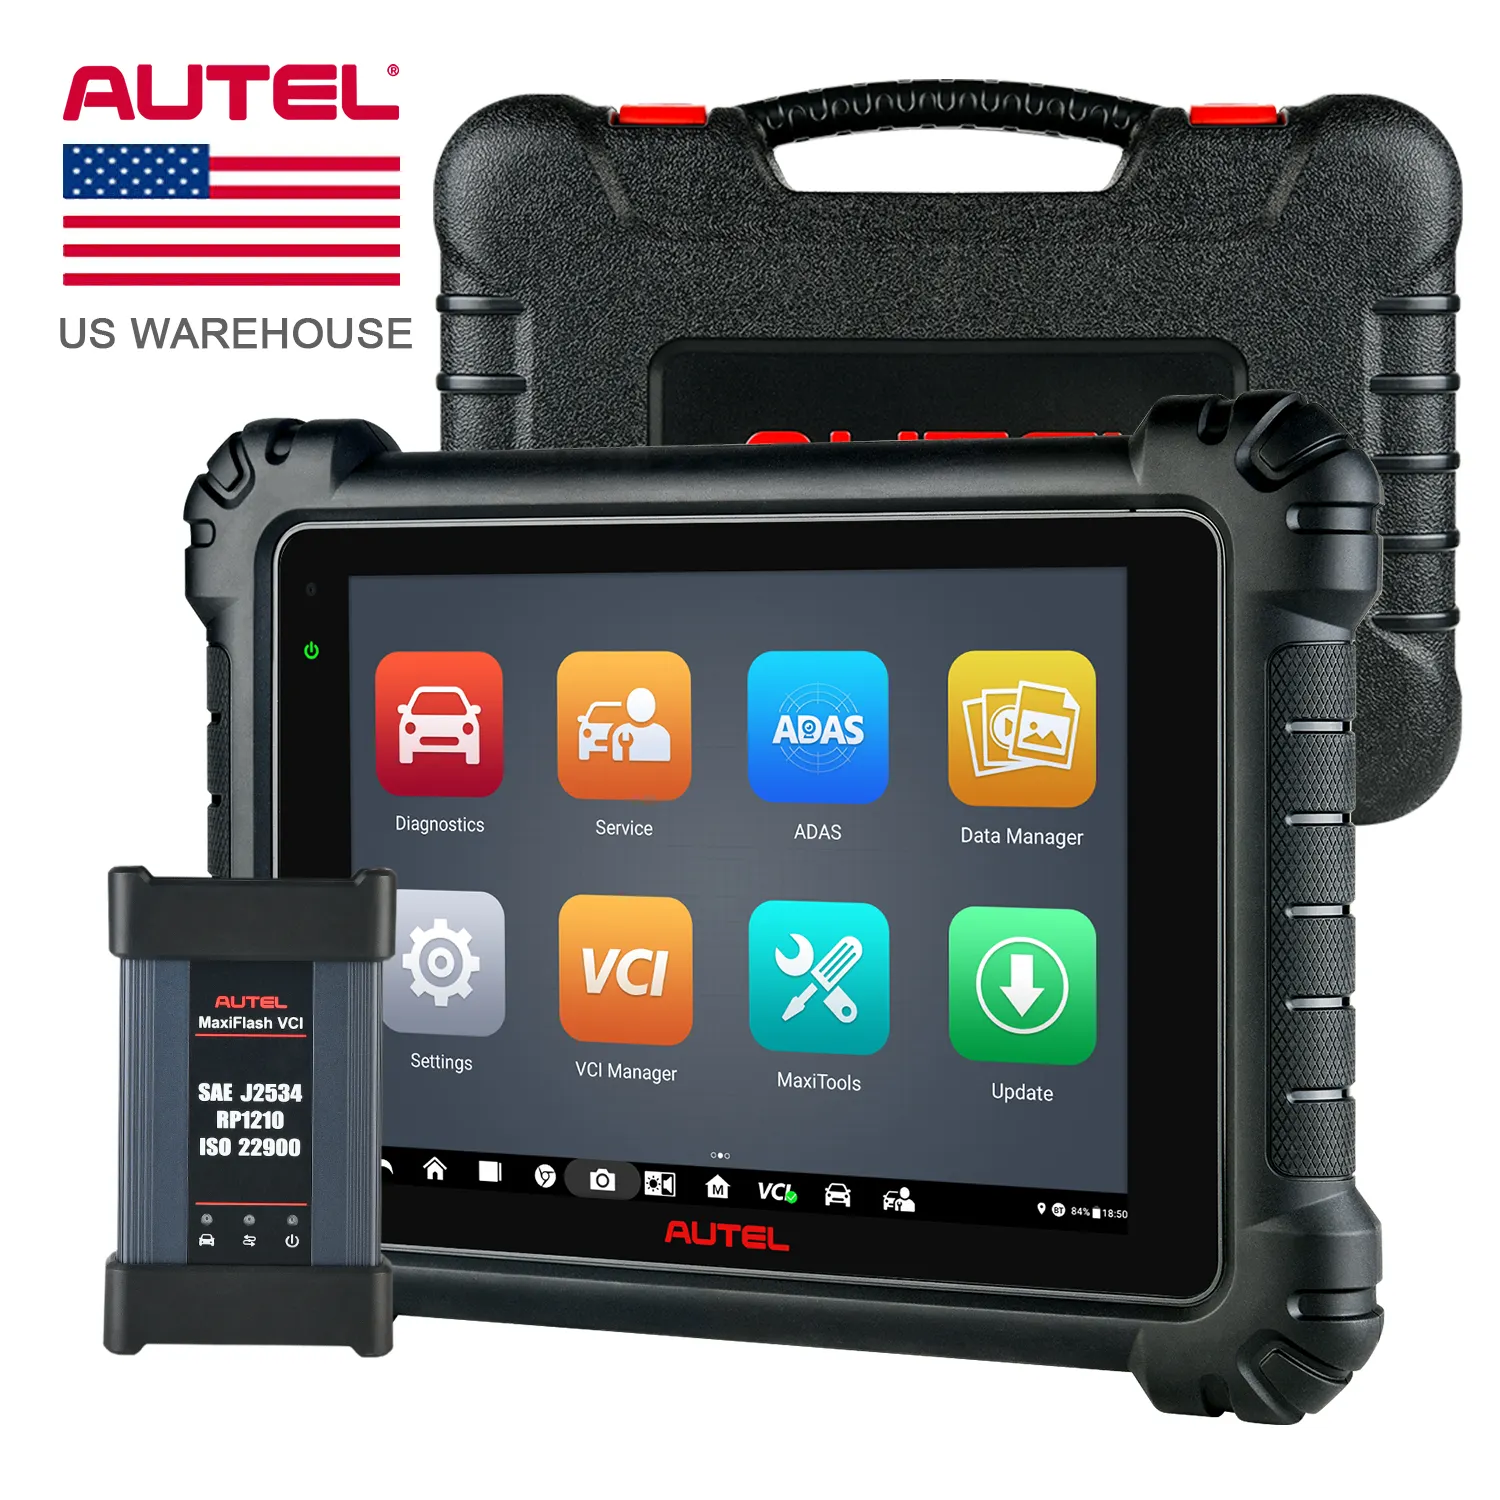 Autel MaxiSys MS909 Advanced Car Diagnostic Scanner 36+ Services ECU Coding Programming Autel MS909 MS919 USA Only With VCMI